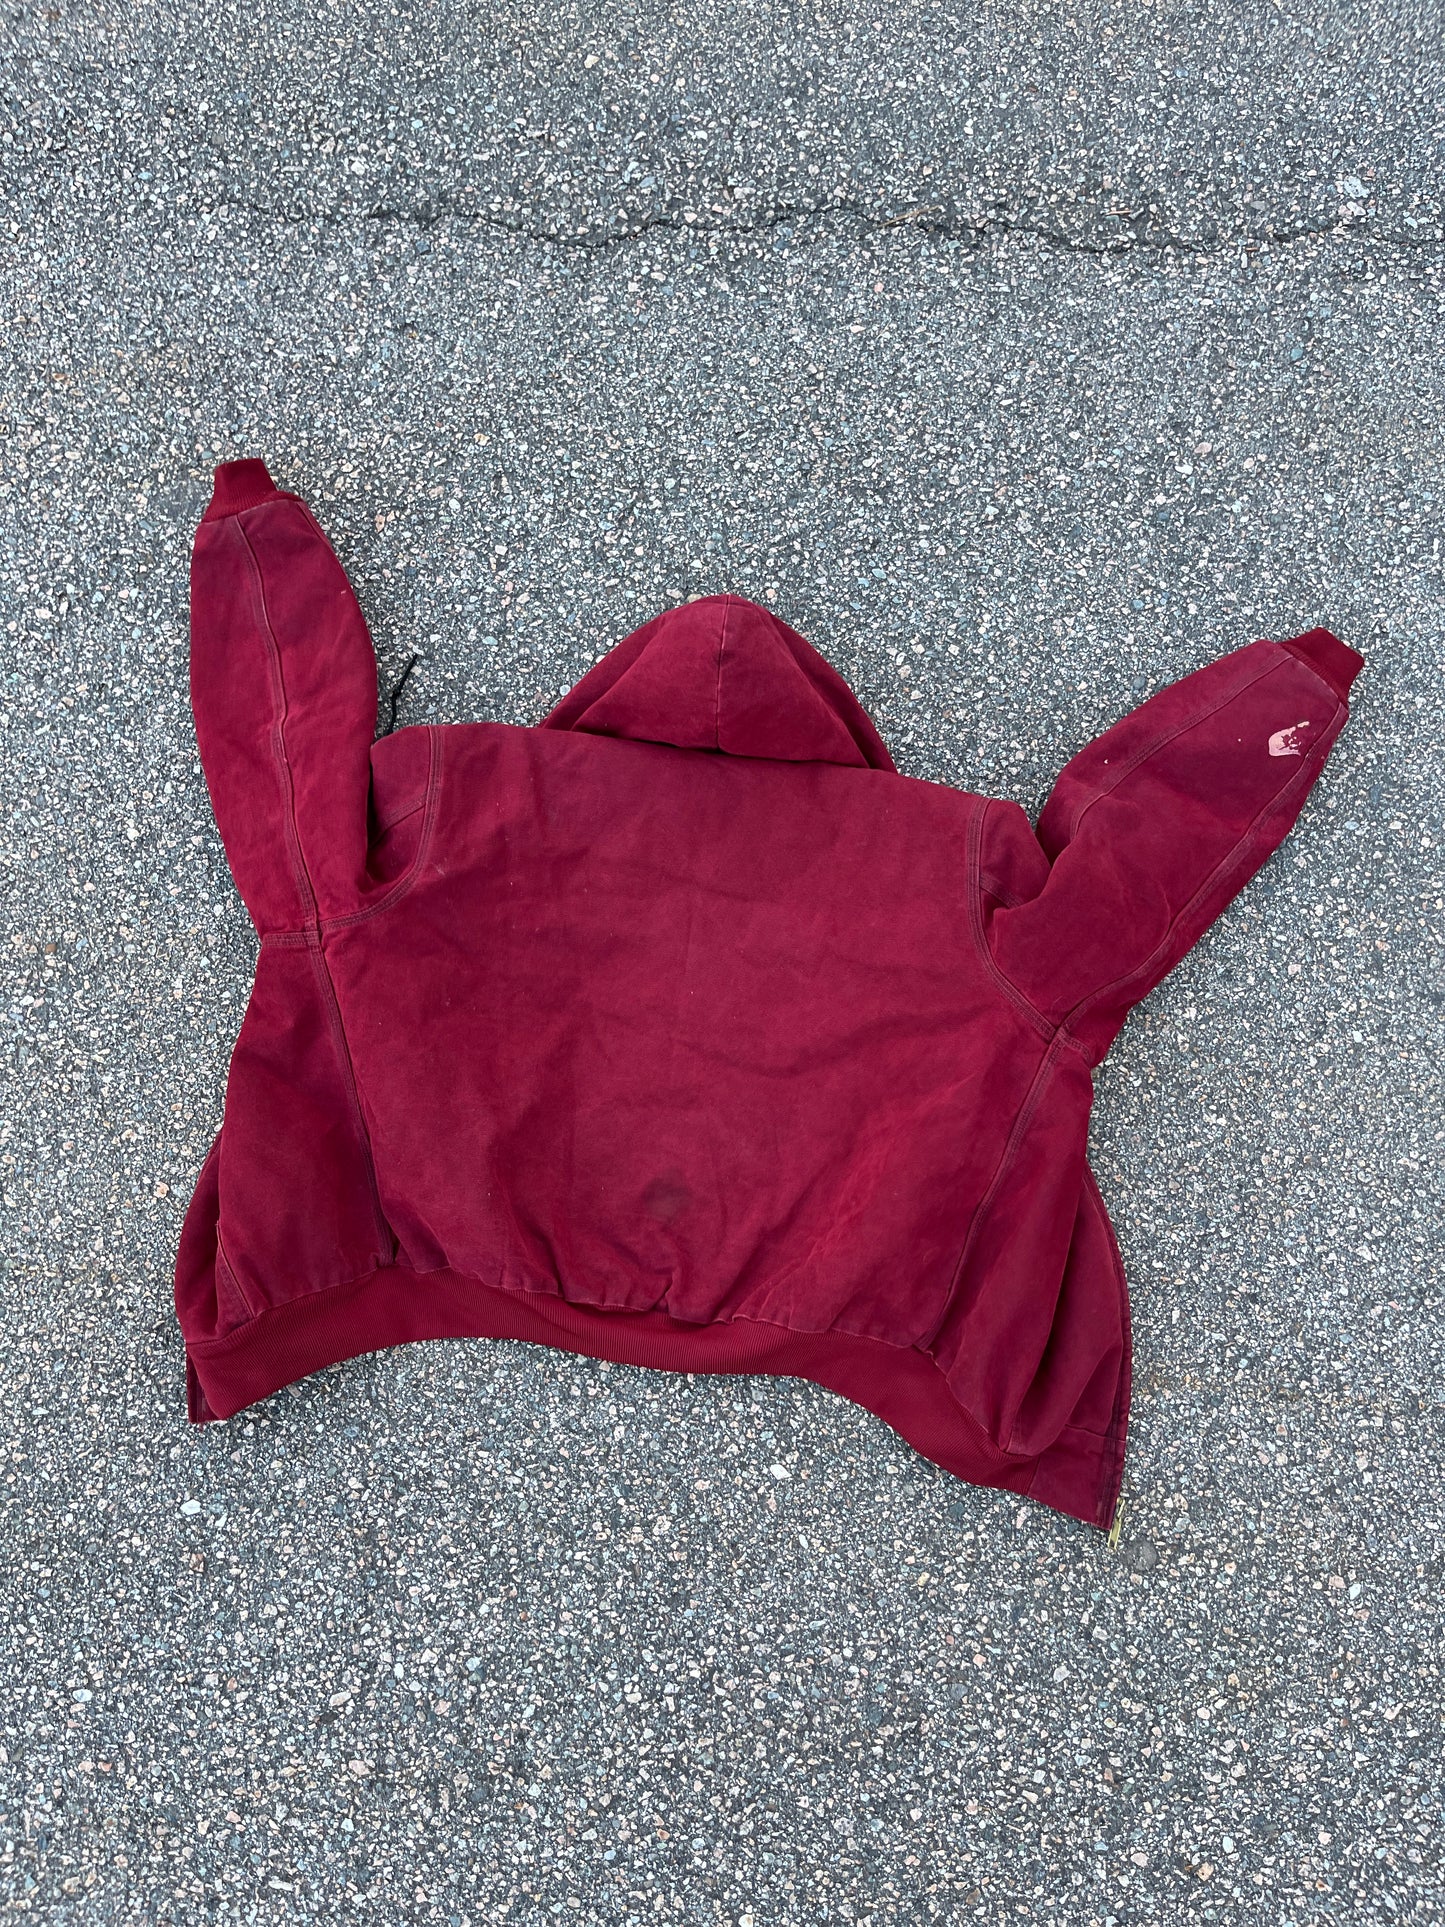 Faded Crimson Red Carhartt Active Jacket - Boxy L-XL